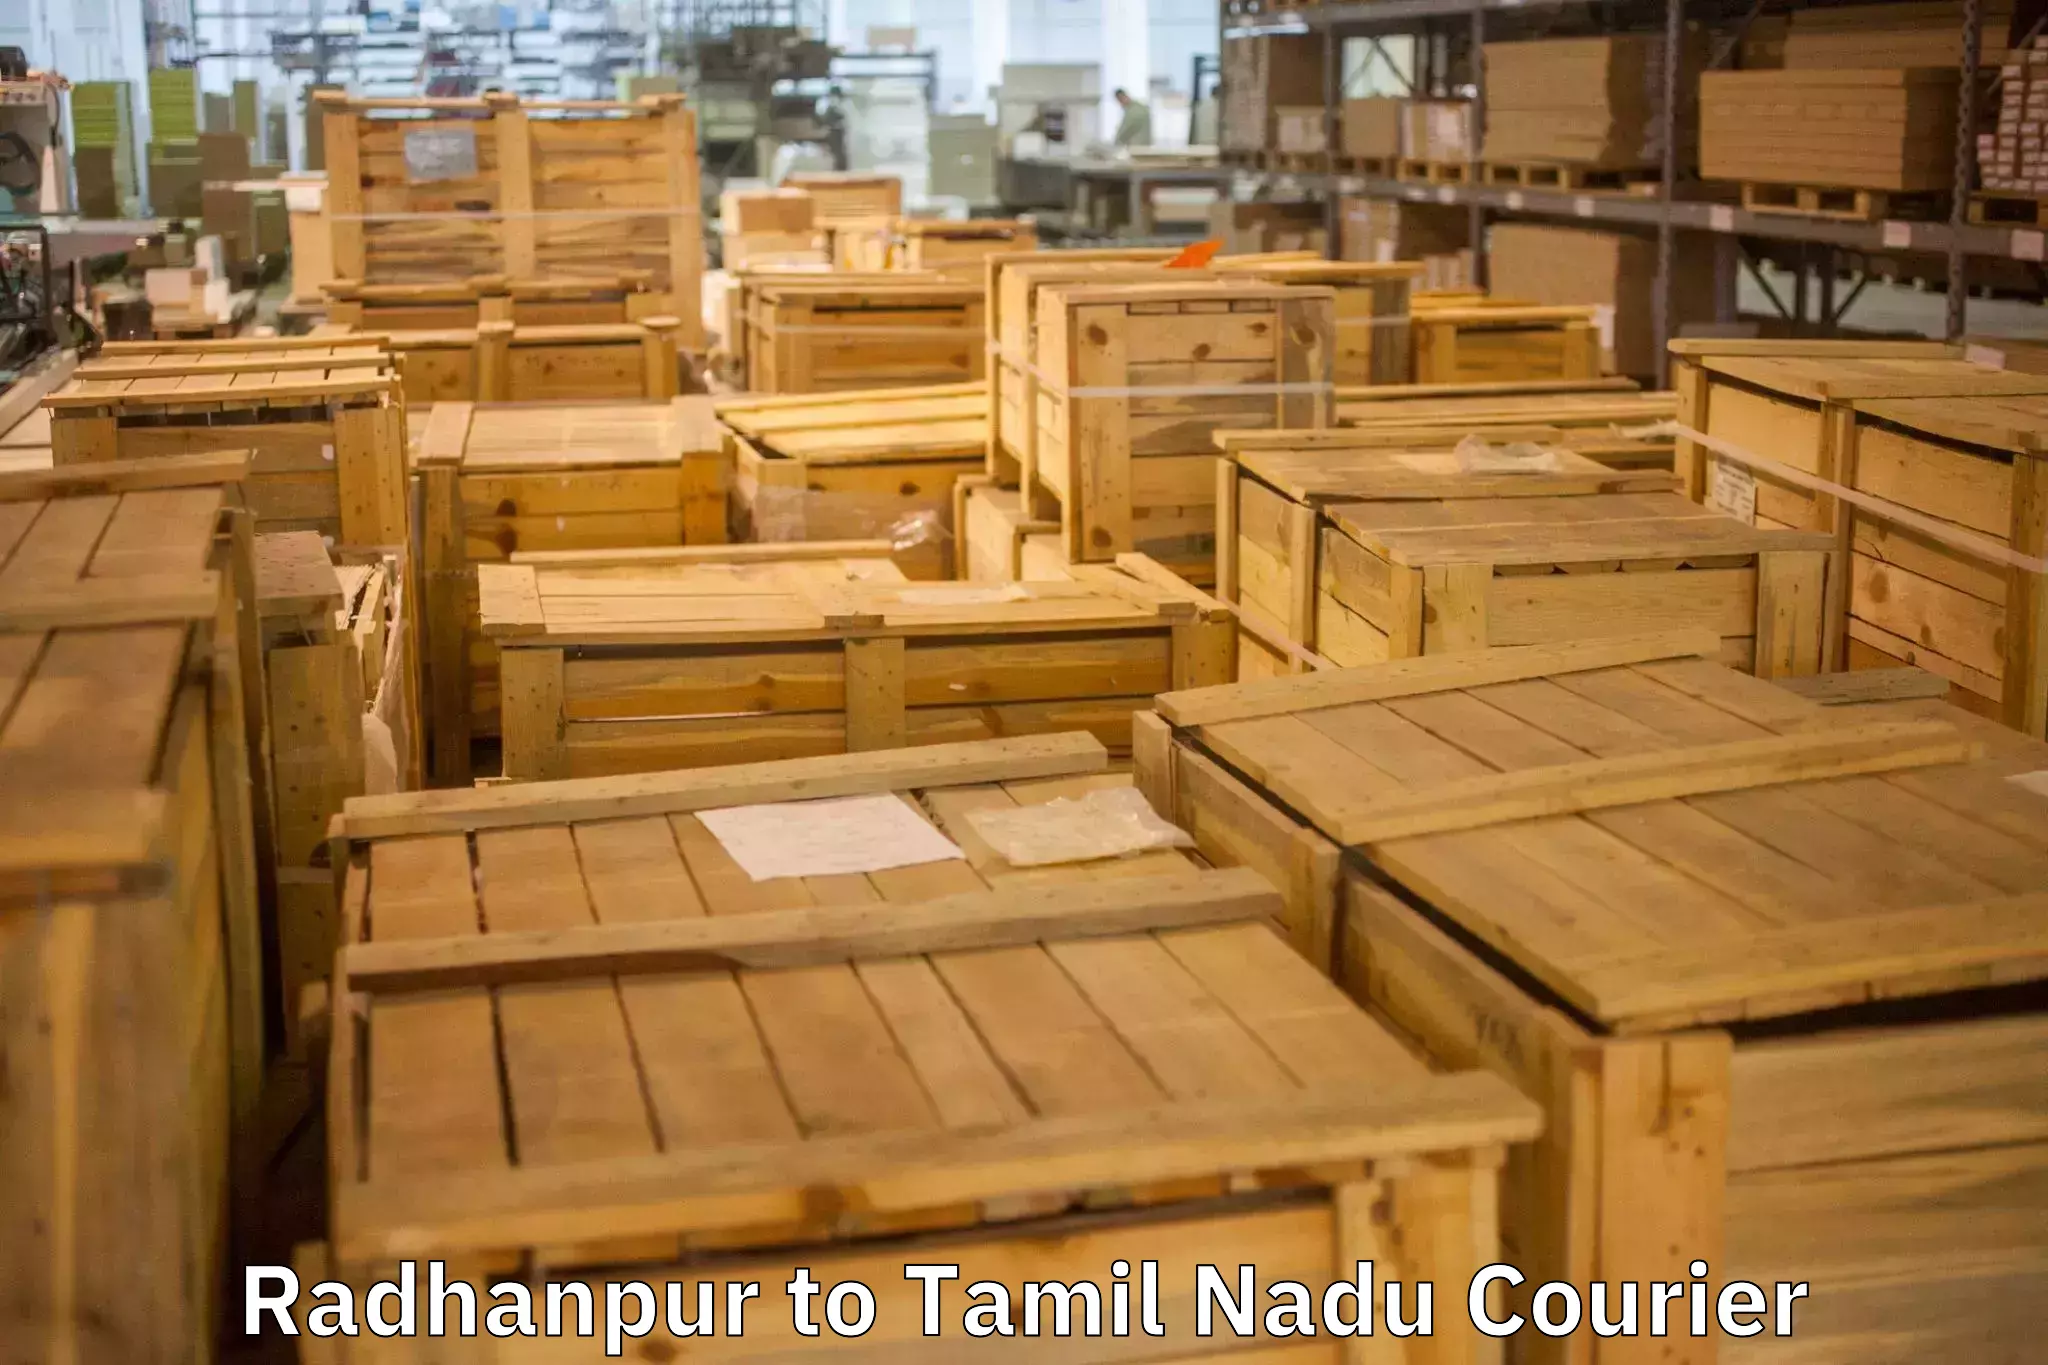 Furniture transport solutions in Radhanpur to Ennore Port Chennai